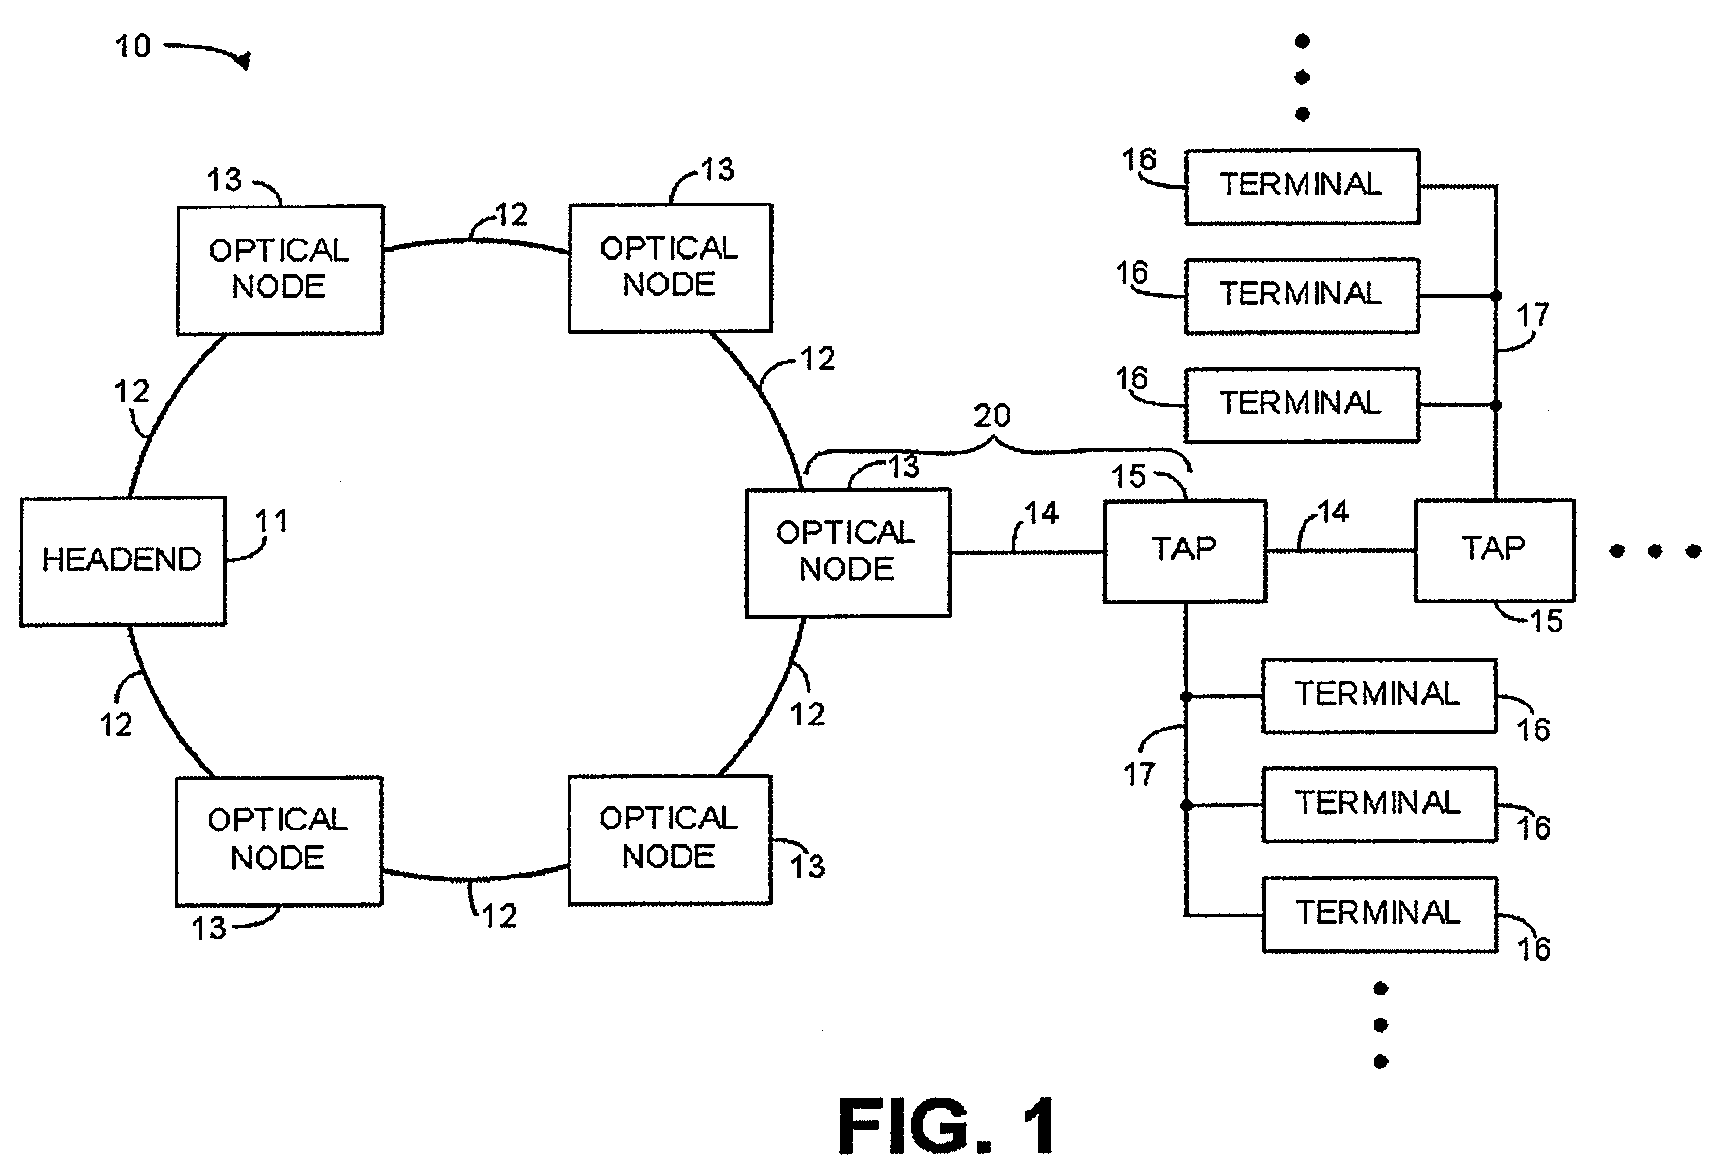 Providing alternative services based on receiver configuration and type of display device